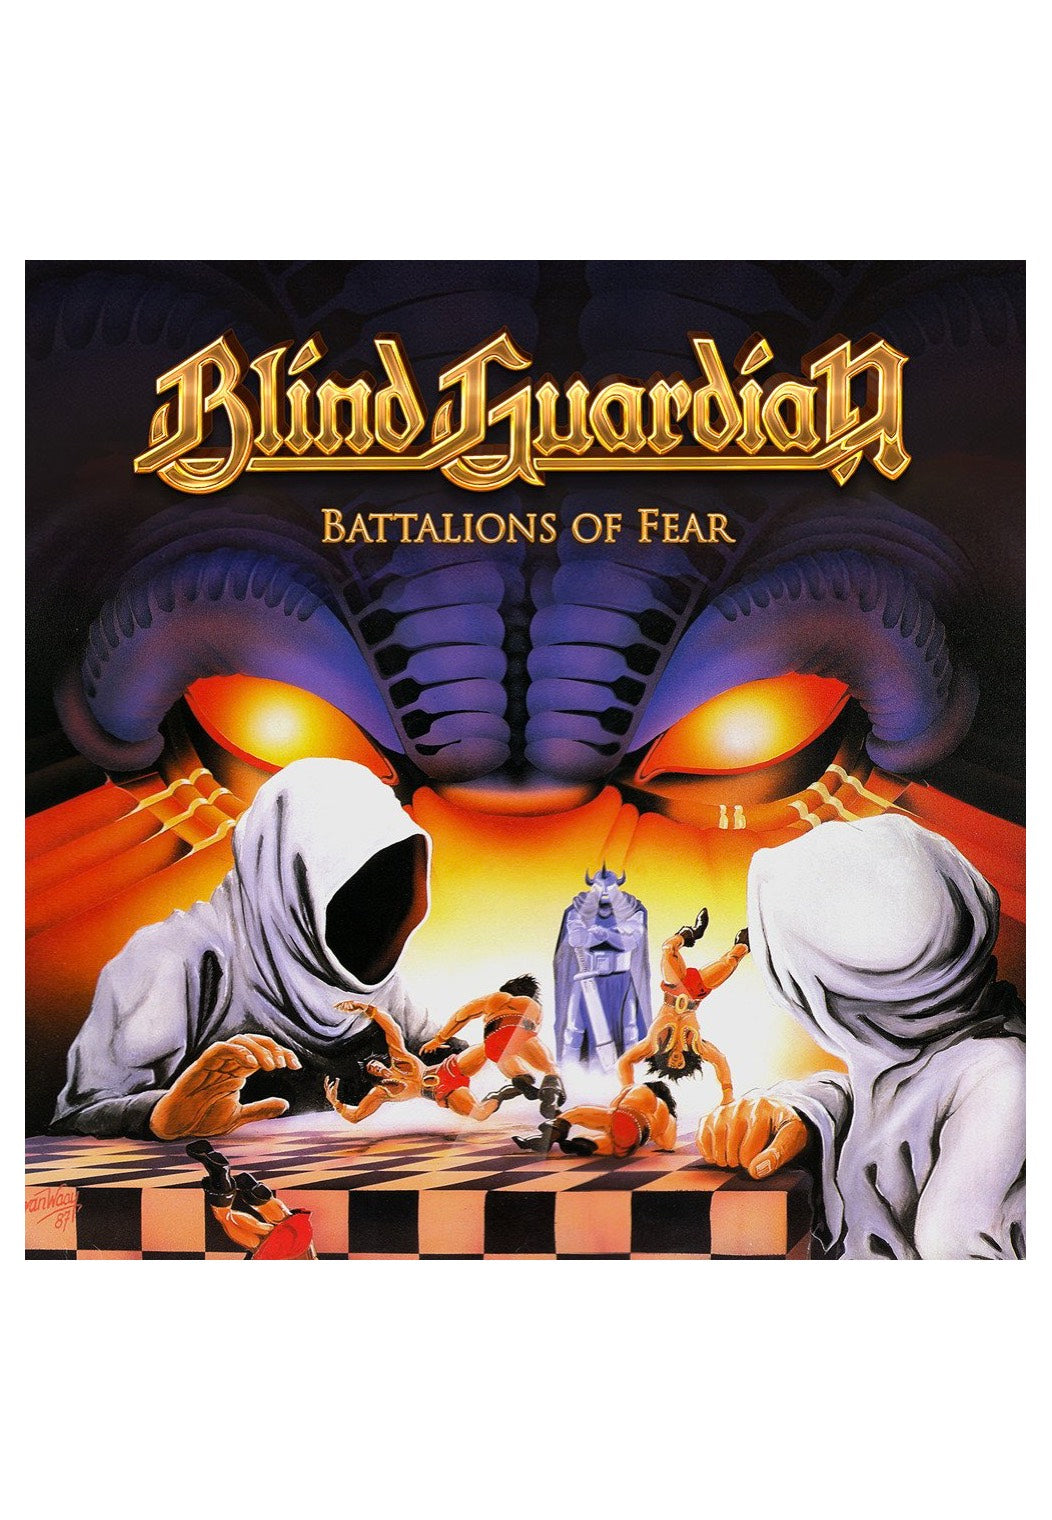 Blind Guardian - Battalions Of Fear (Remixed &Remastered) - Digipak 2 CD